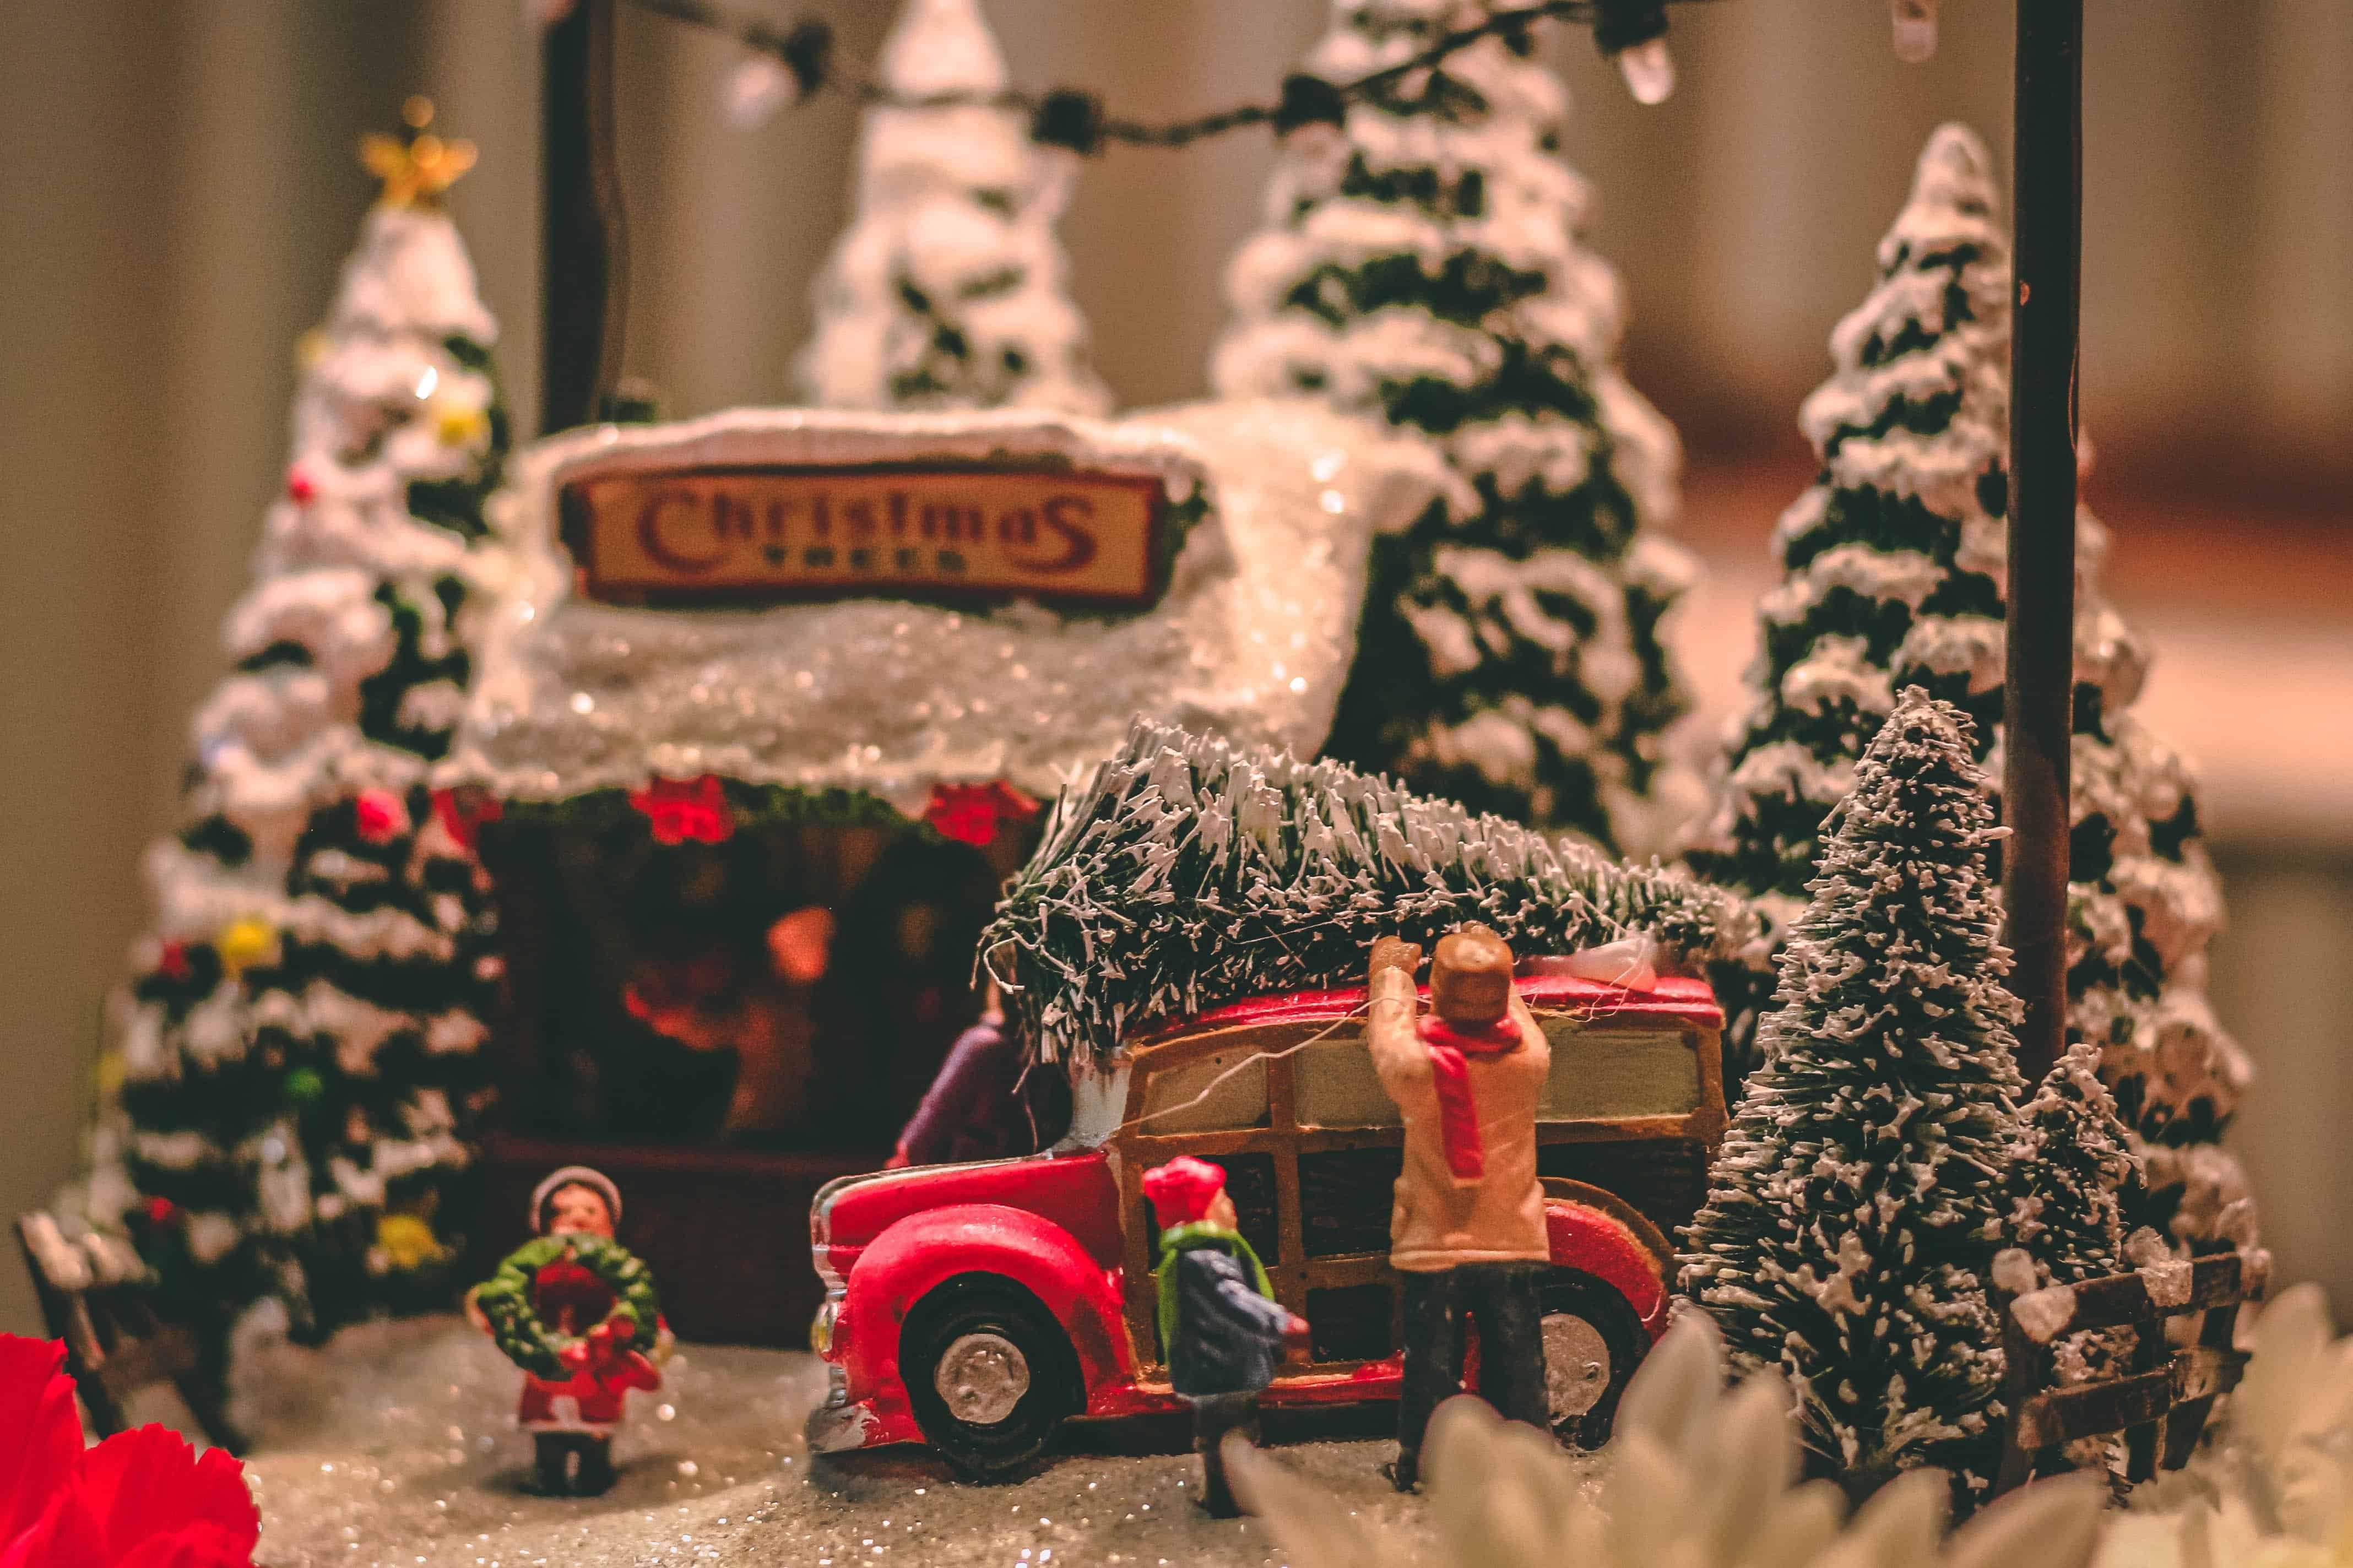 12 Christmas Traditions That Will Make Every Year Pure Magic